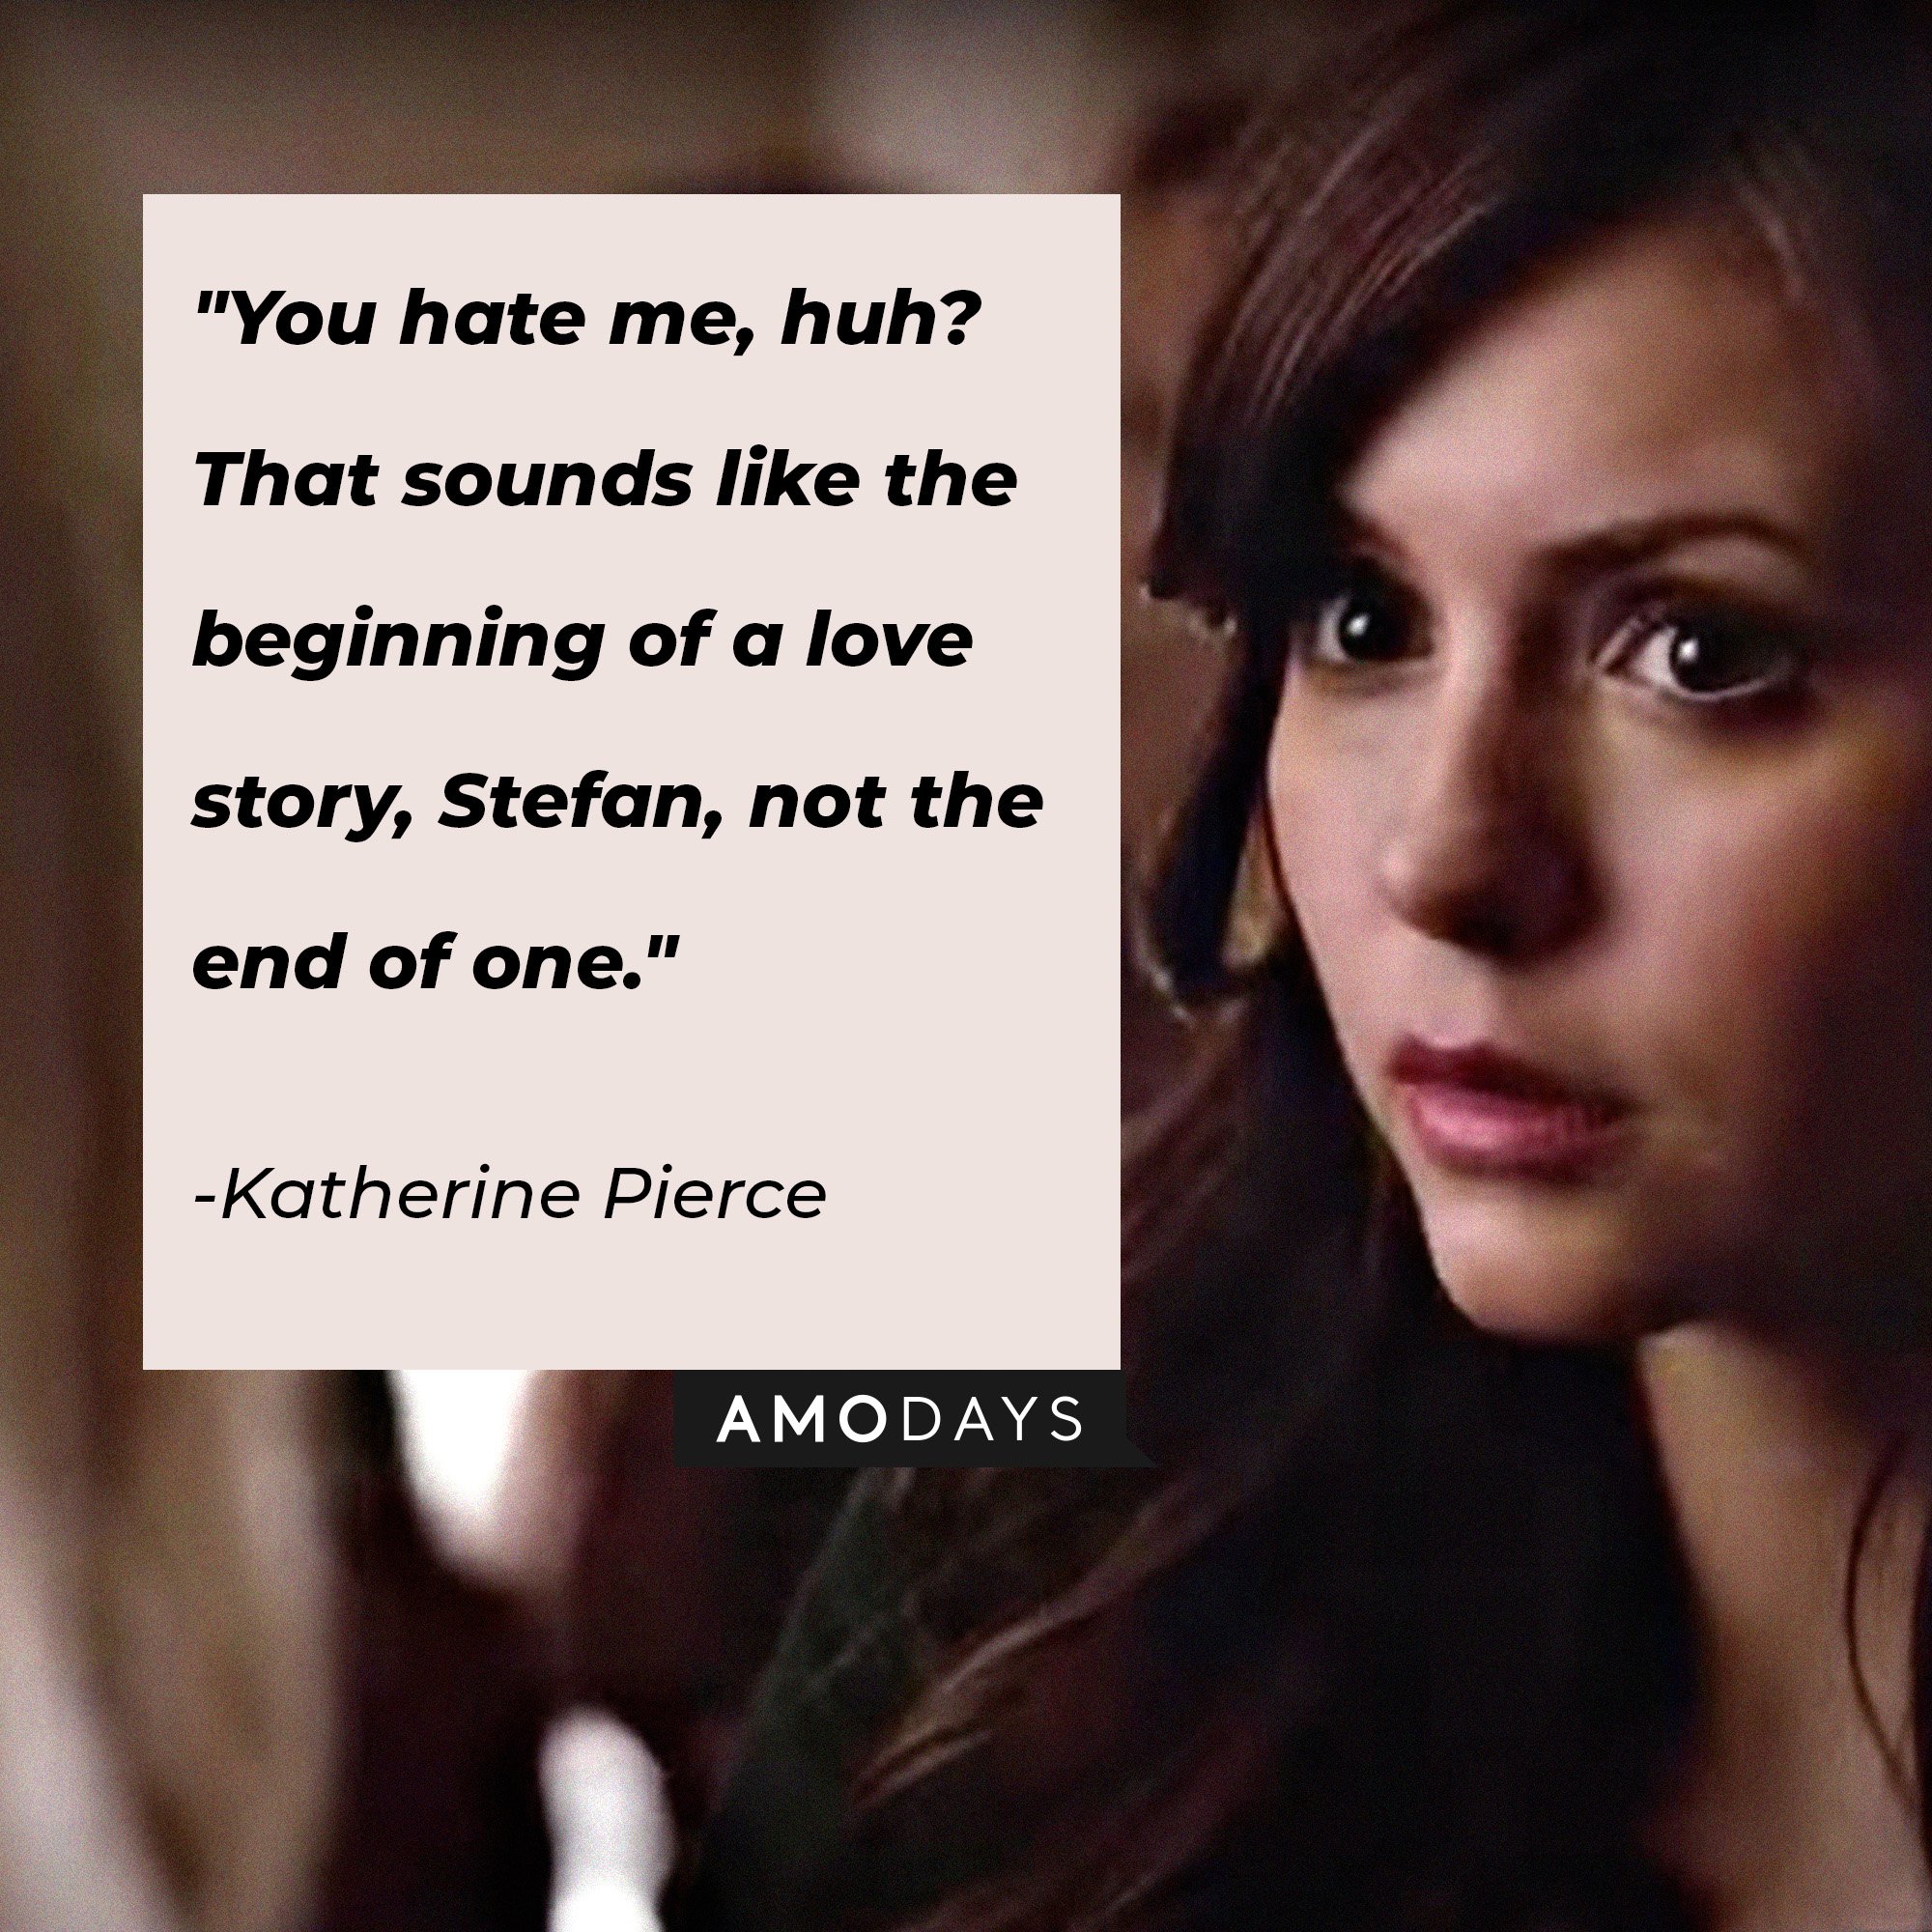 Katherine Pierce's quote: "You hate me, huh? That sounds like the beginning of a love story, Stefan, not the end of one." | Image: AmoDays